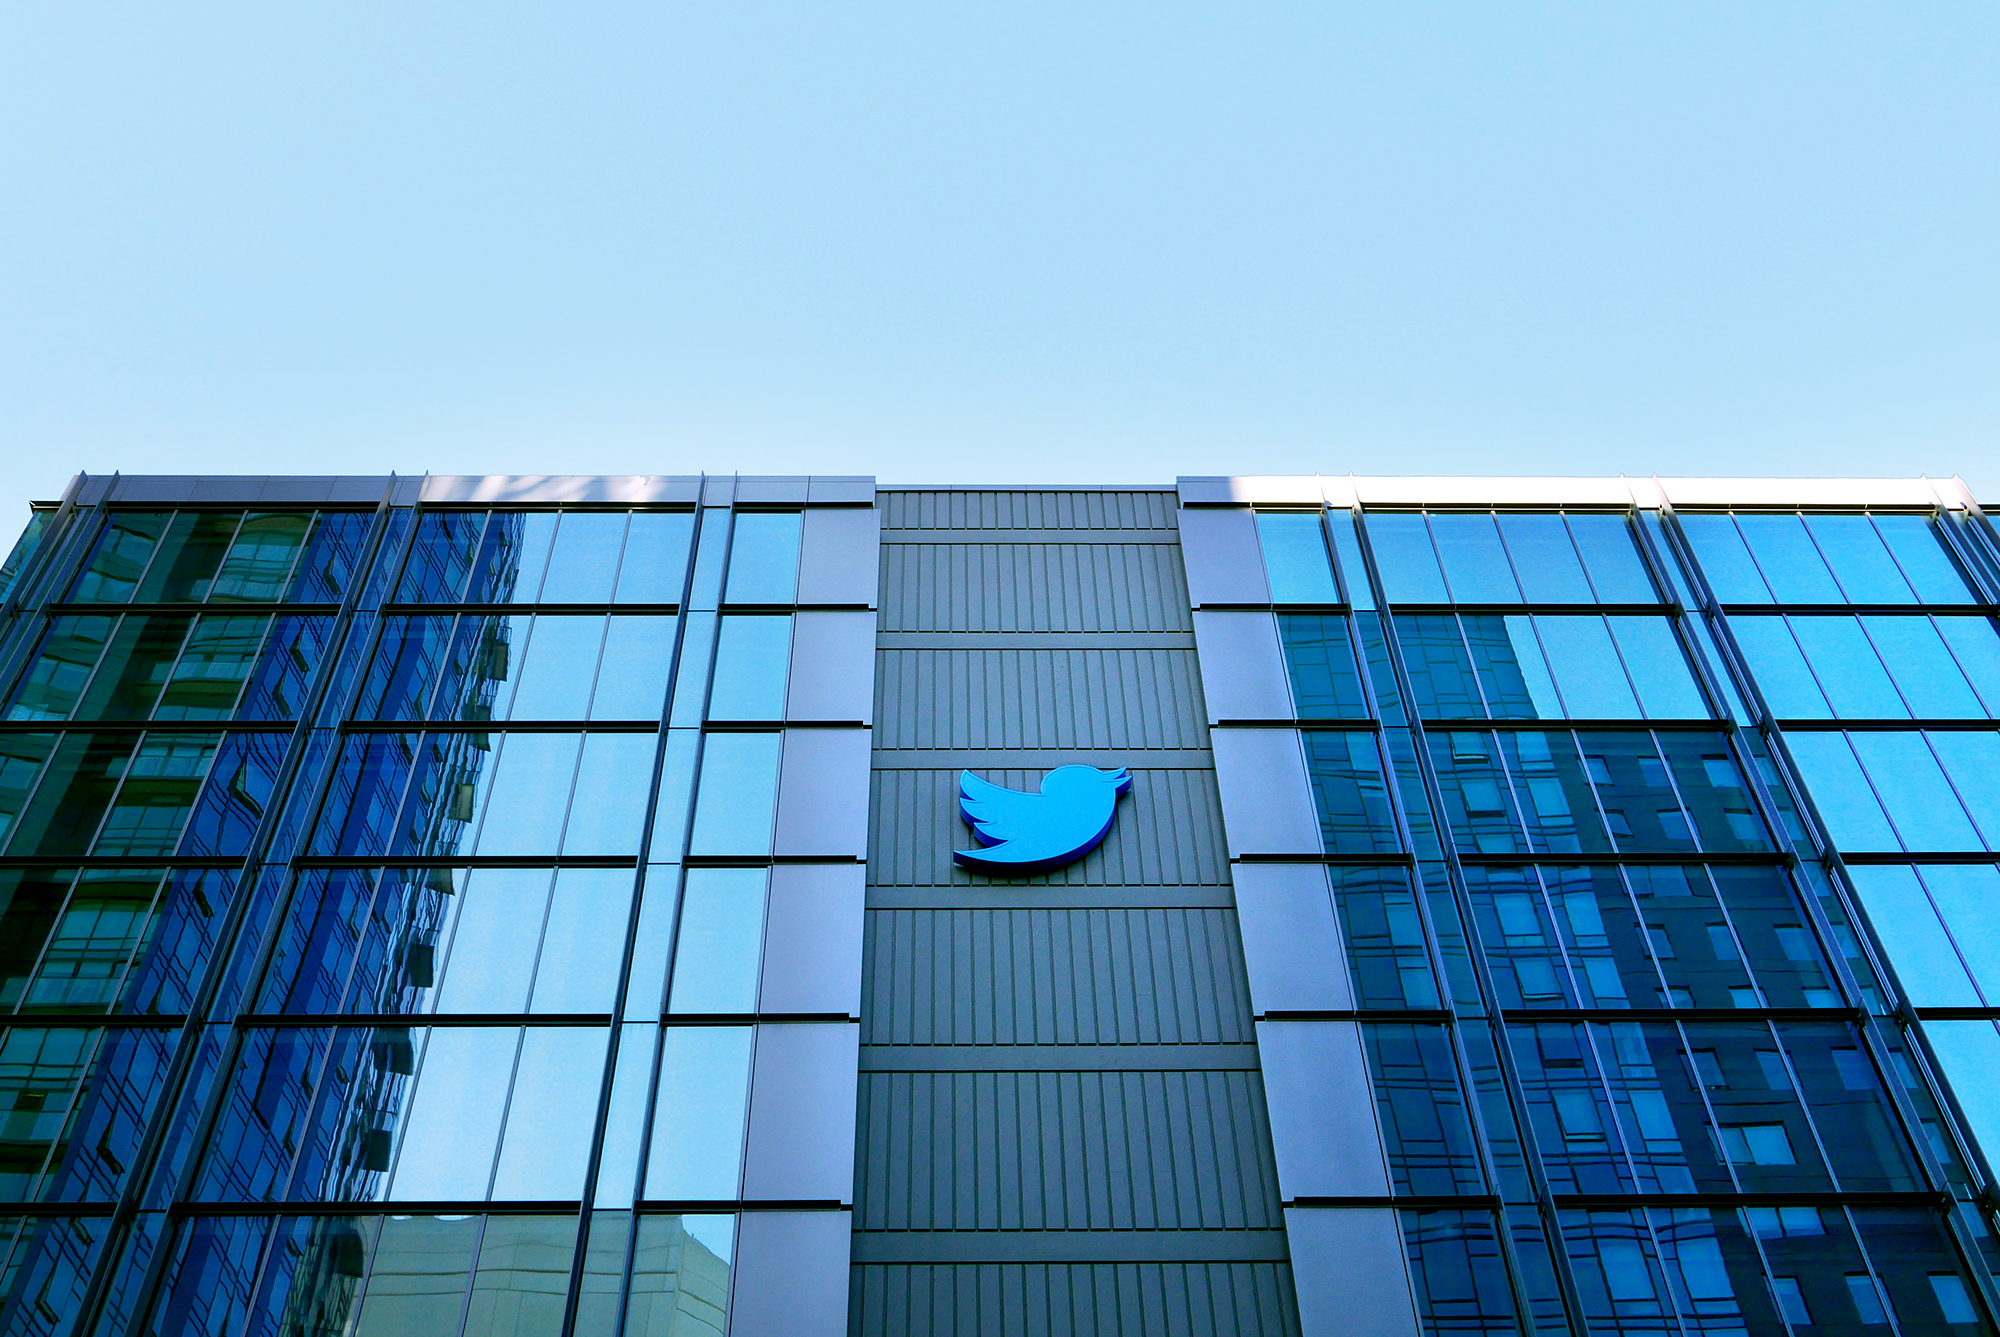 Why does it make sense for Salesforce to purchase Twitter